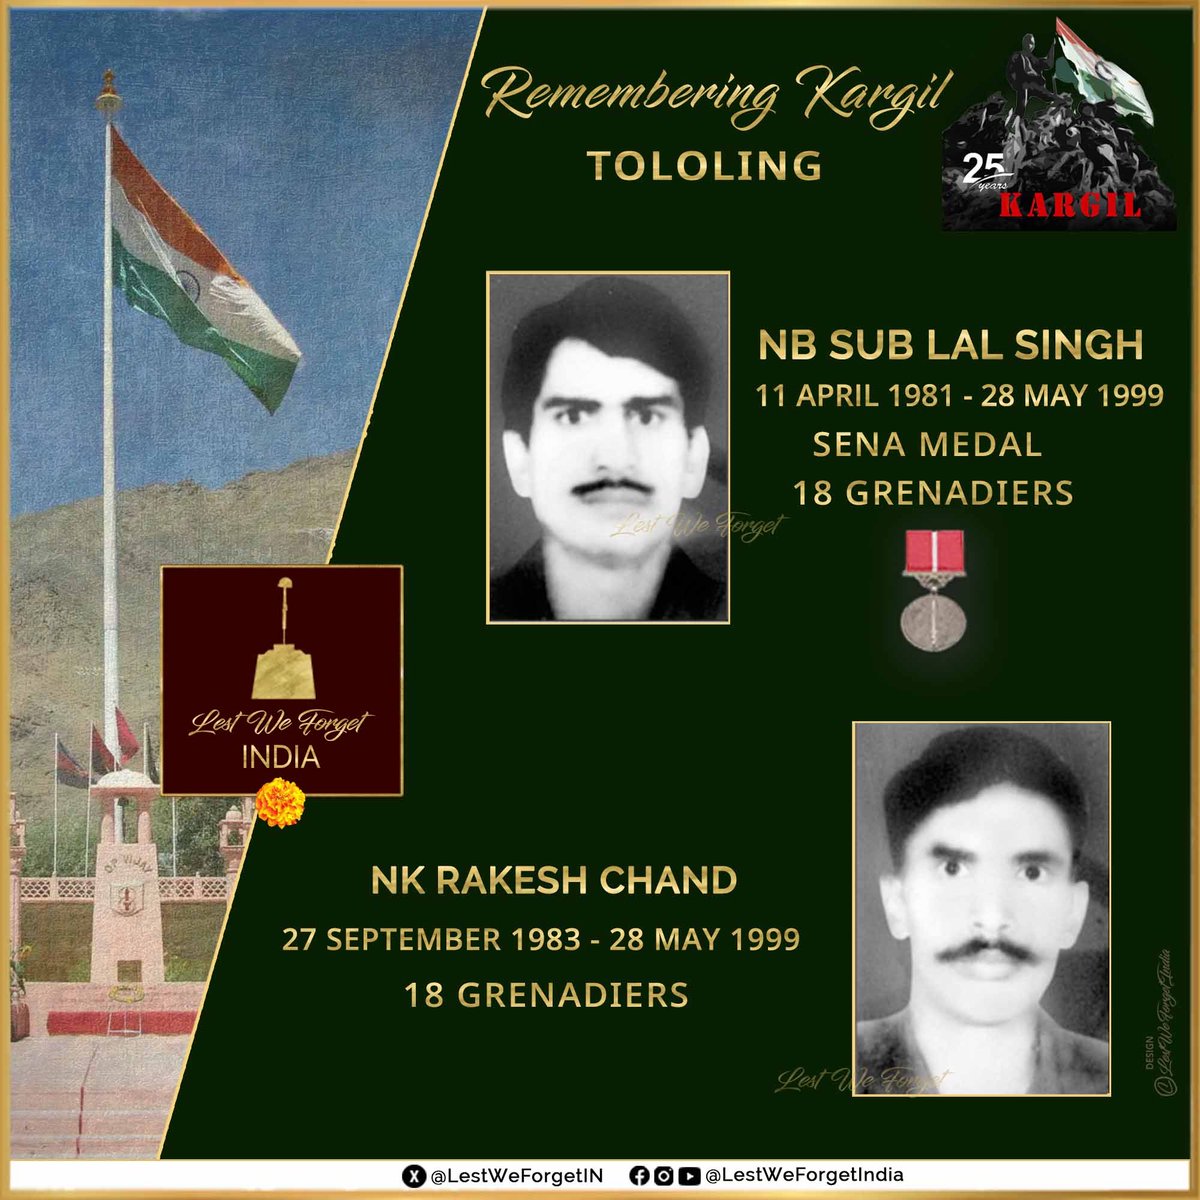 Commemorating 25 years of #Kargil #LestWeForgetIndia🇮🇳 Nb Sub Lal Singh #SenaMedal & Nk Rakesh Chand, 18 GRENADIERS, who laid down their lives fighting at #Tololing, #OnThisDay 28 May in 1999, during #OpVijay The #IndianBraves were part of the assault team that inflicted